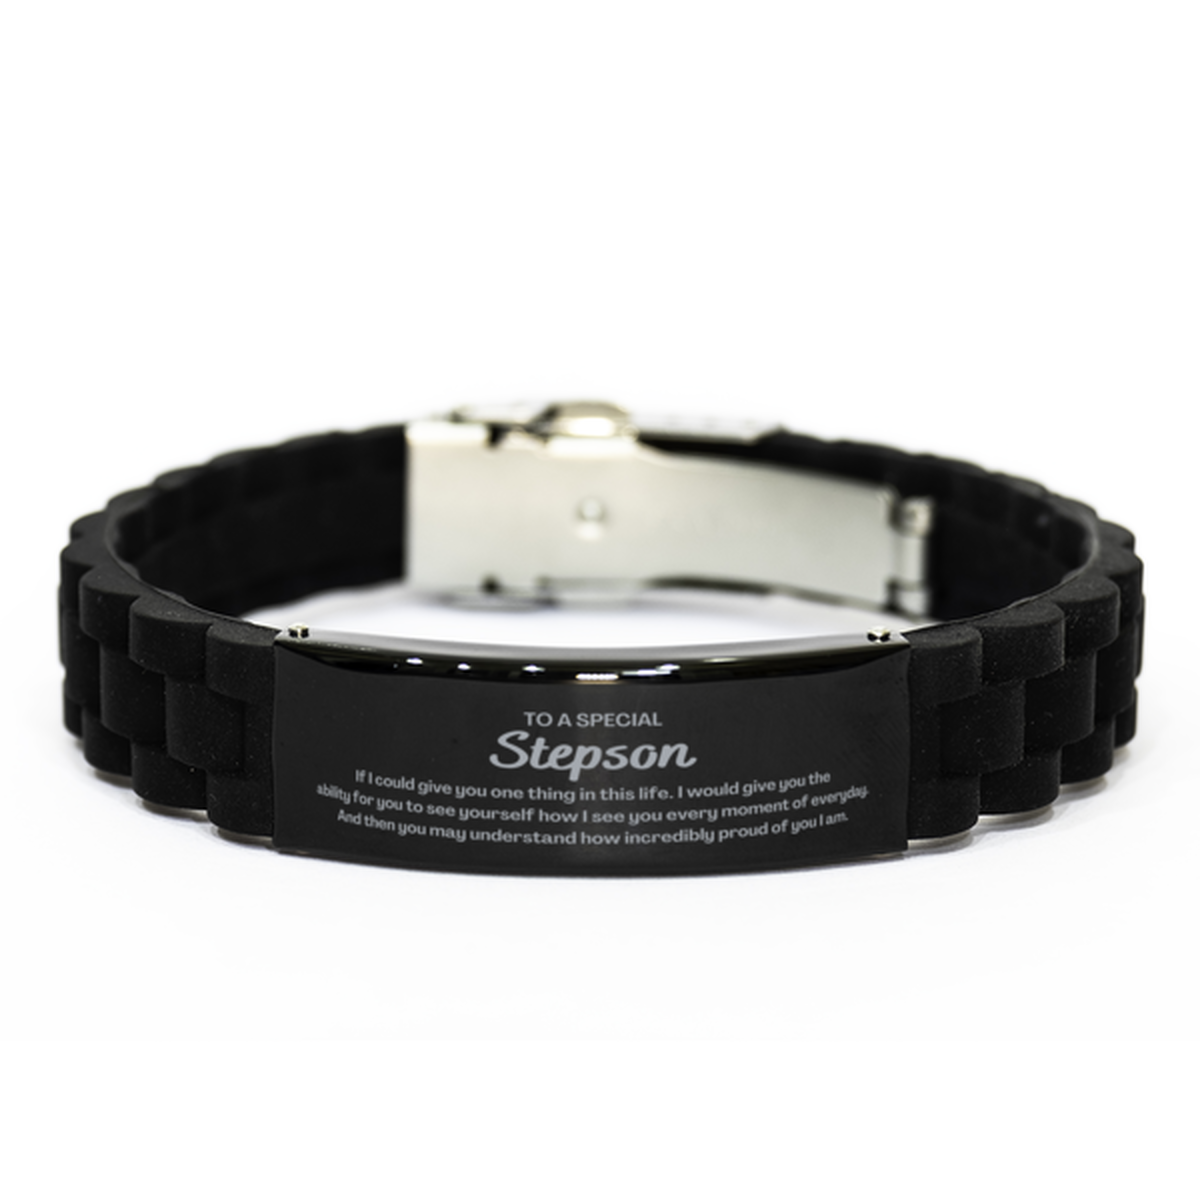 To My Stepson Black Glidelock Clasp Bracelet, Gifts For Stepson Engraved, Inspirational Gifts for Christmas Birthday, Epic Gifts for Stepson To A Special Stepson how incredibly proud of you I am